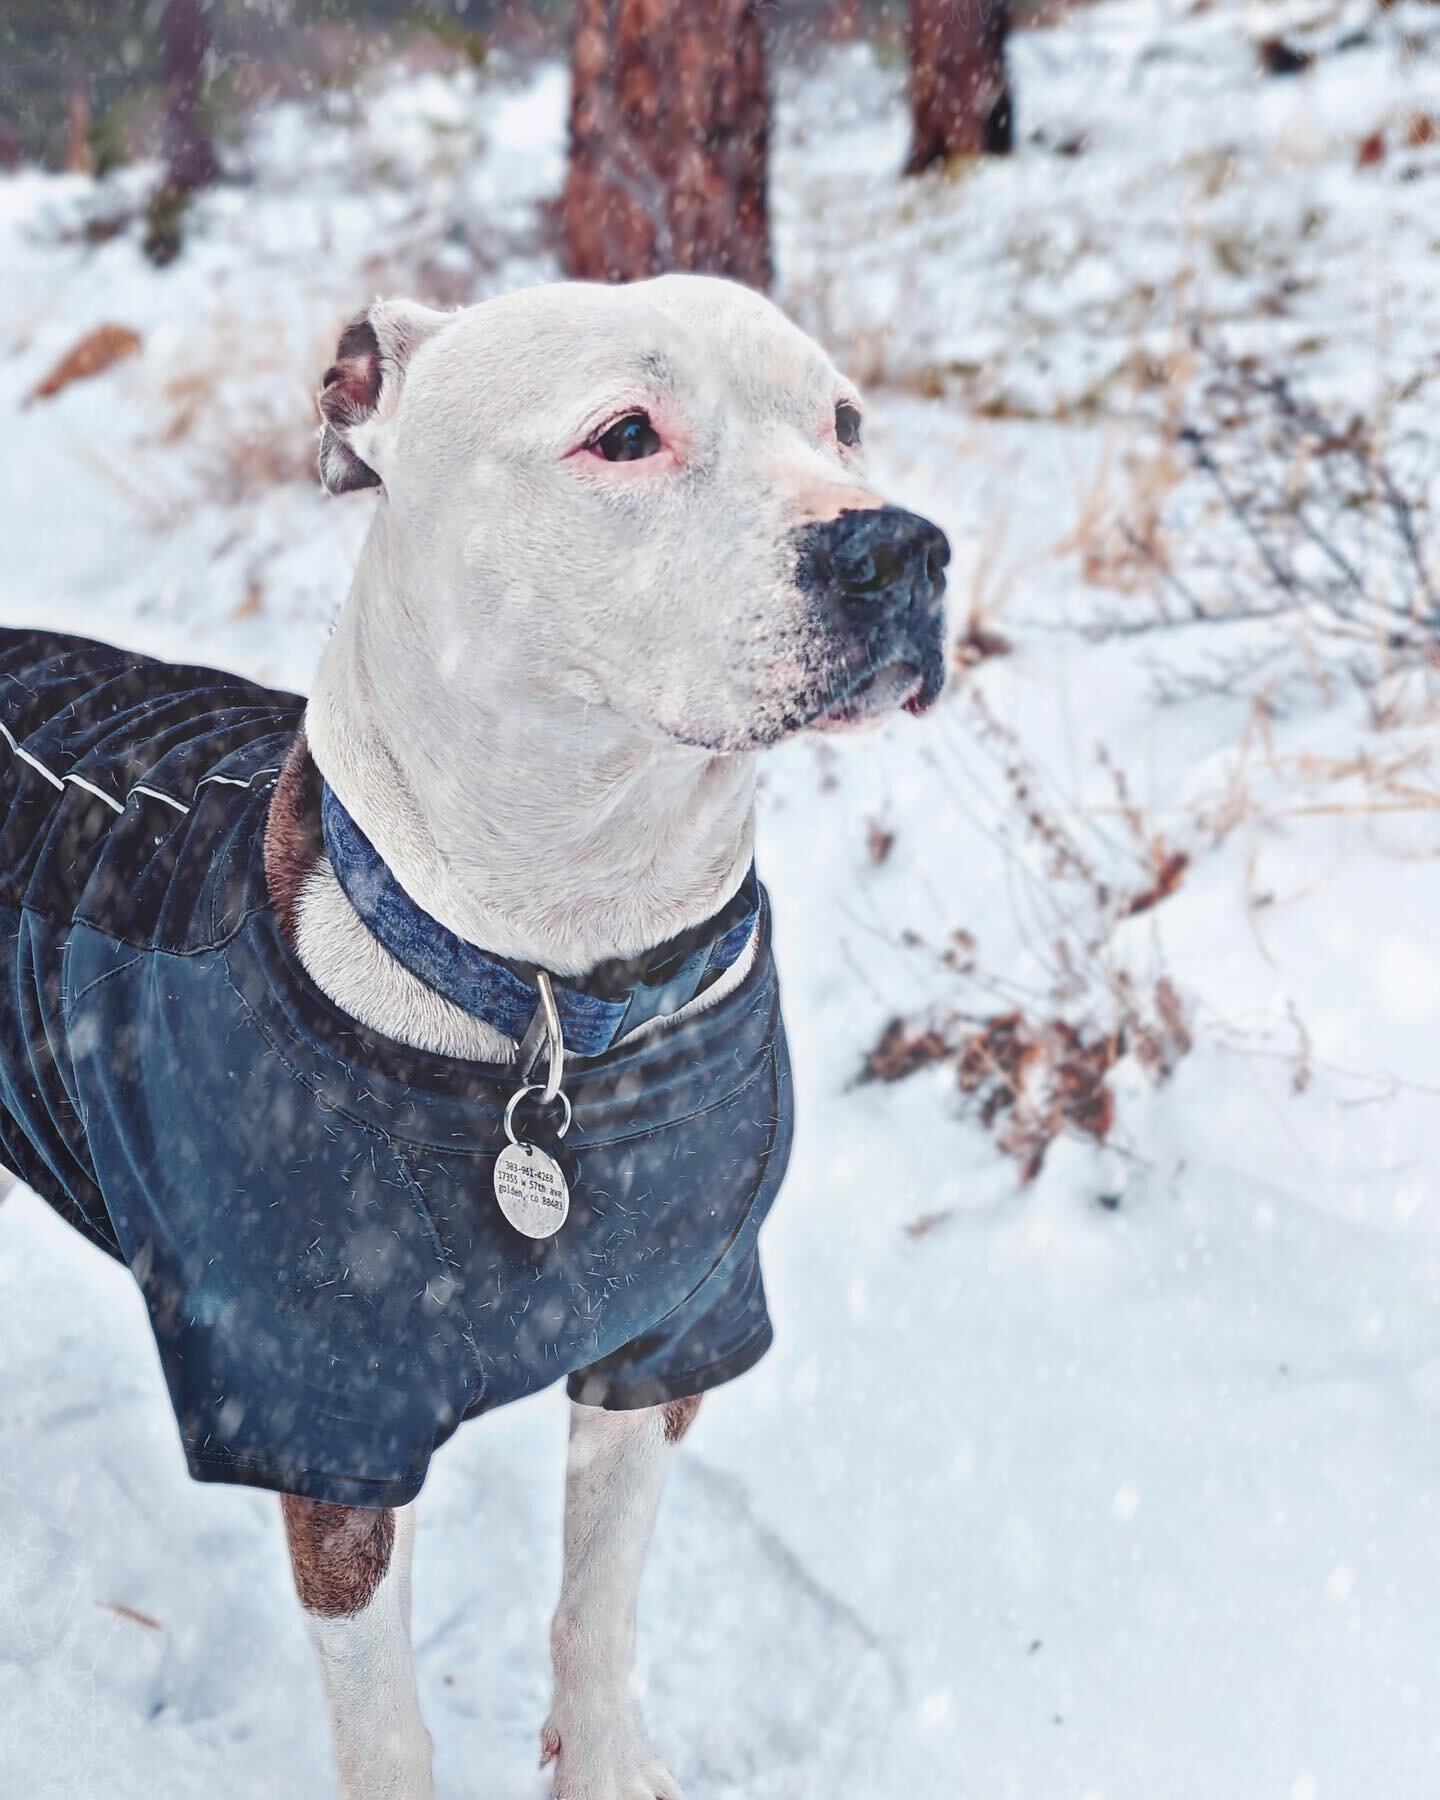 ❄️🐾Even on snowy days it&rsquo;s proven to alleviate stress in dogs to go on their daily walks, here with @coloradoyetidogs we go out no matter the weather! Message us to get your dog on a snow hike! 🐾❄️ 
.
.
.
.
.
.
#snowsalt #icemelt #dogsafe #do